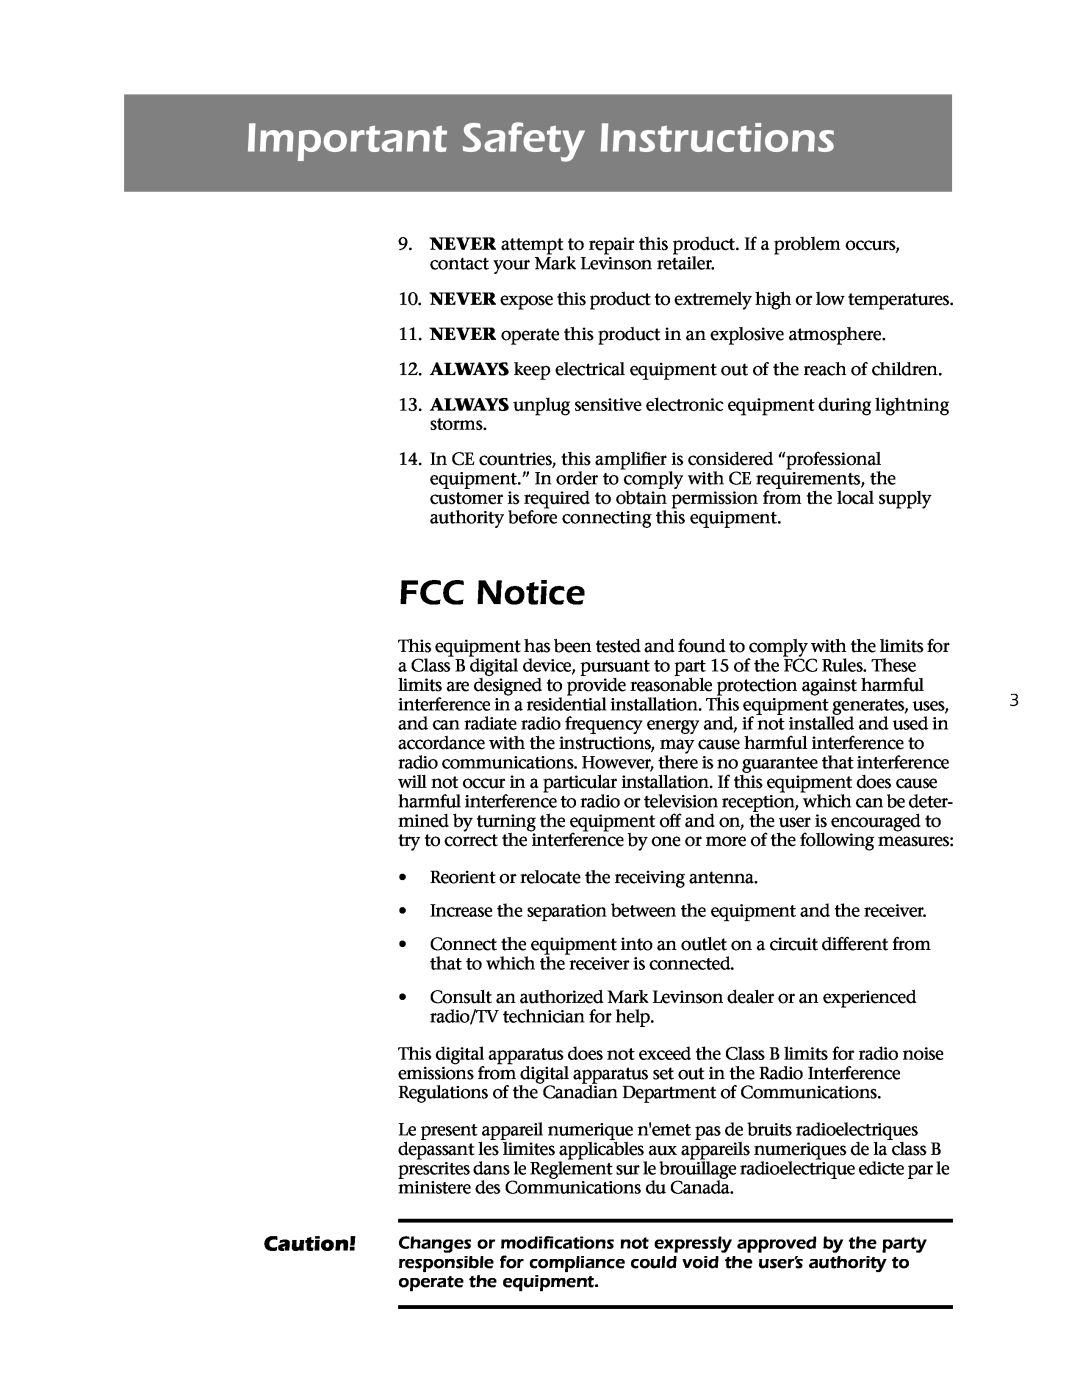 Mark Levinson 433 owner manual FCC Notice, Important Safety Instructions, operate the equipment 